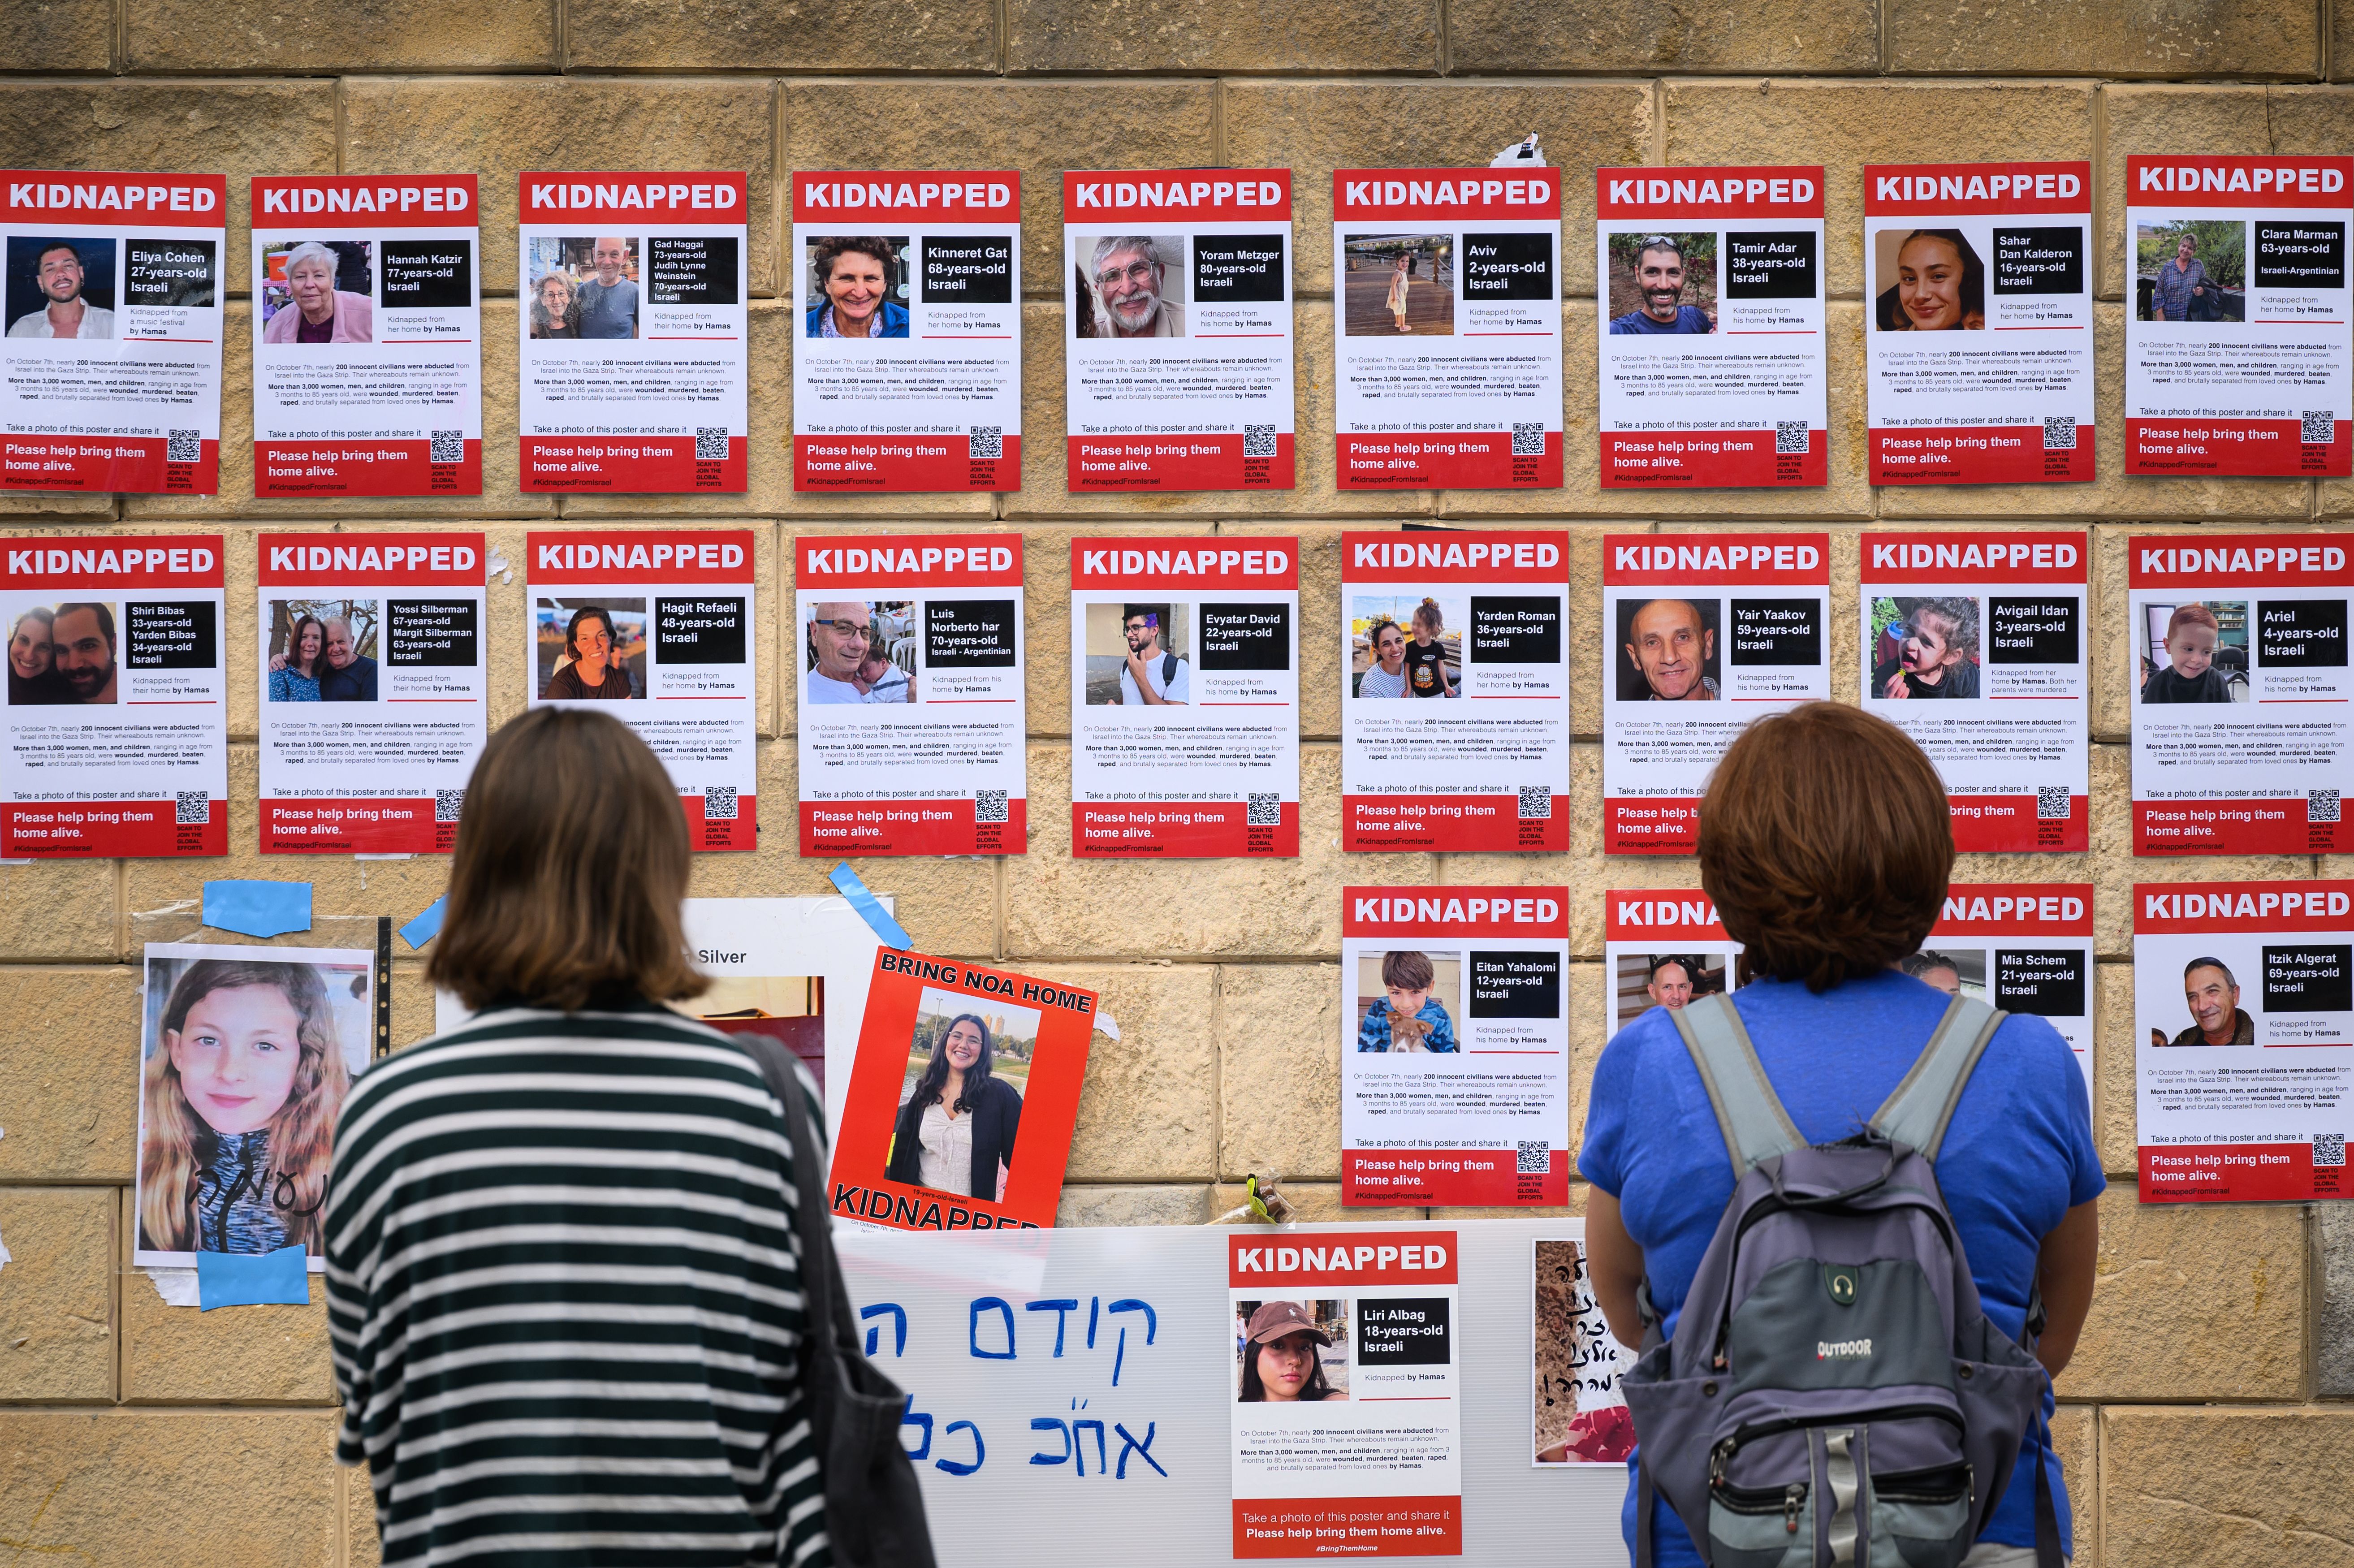 Two people looking up at a wall covered in posters showing faces of hostages with the word "KIDNAPPED" at the top of each poster. 